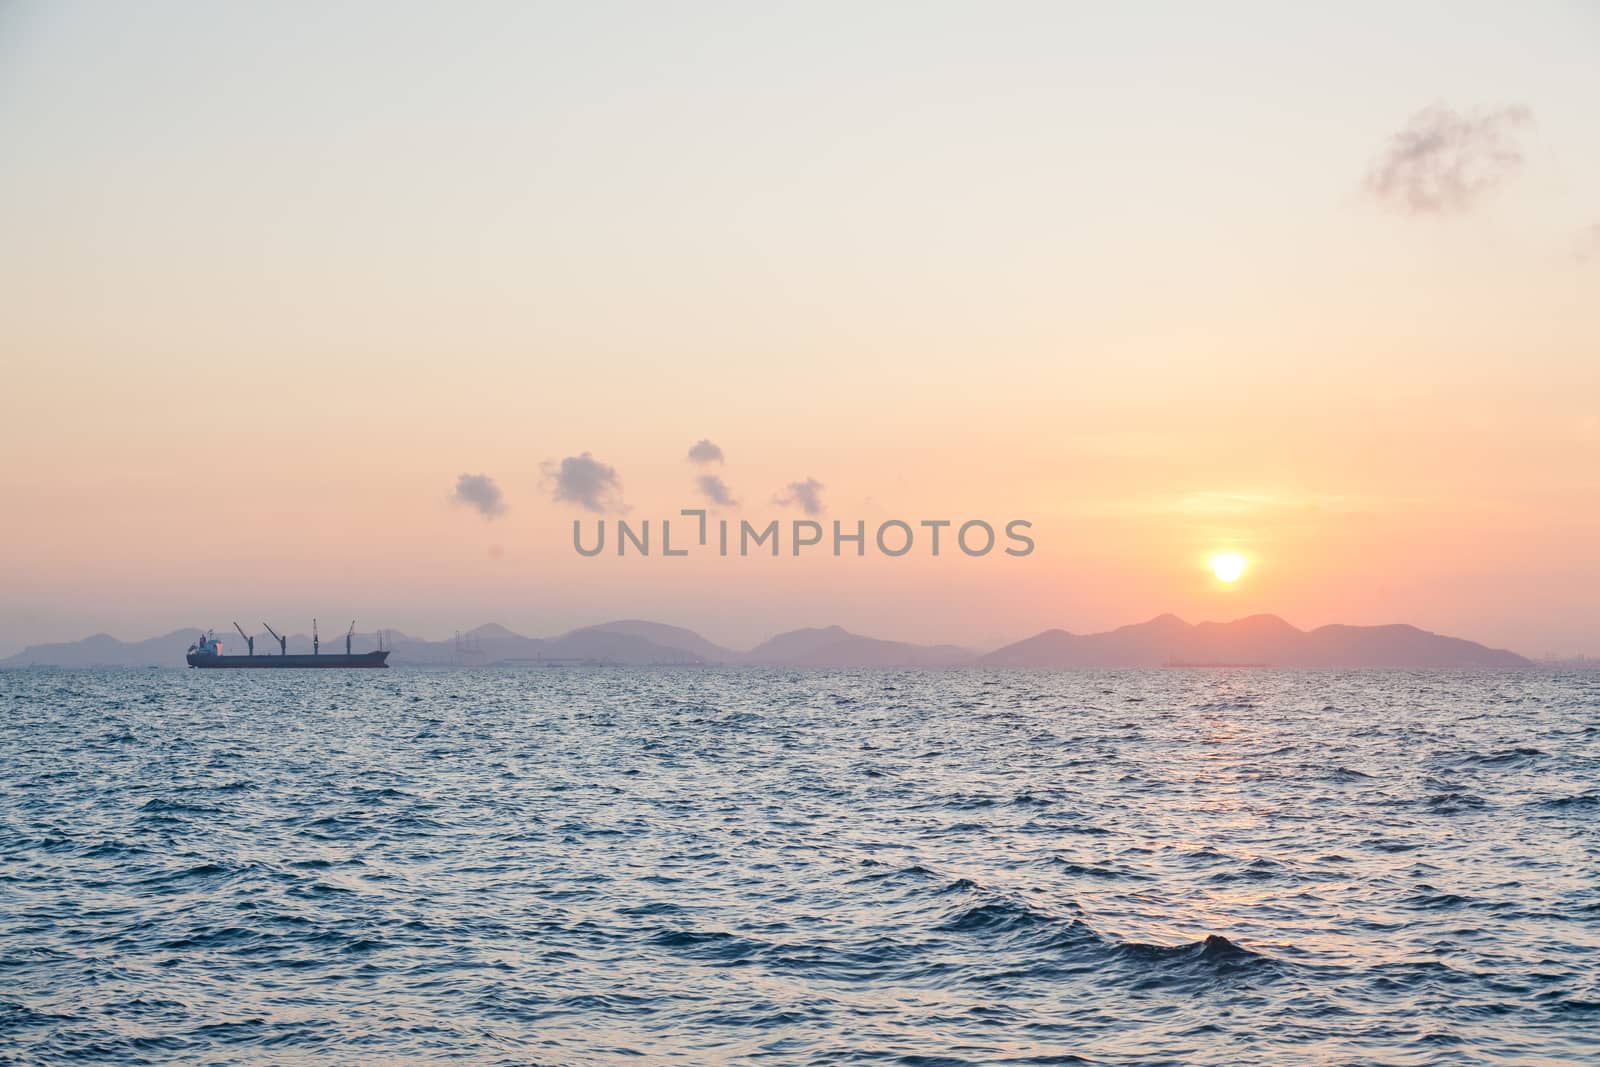 Large cargo ships and the sunrise in the morning. by a454